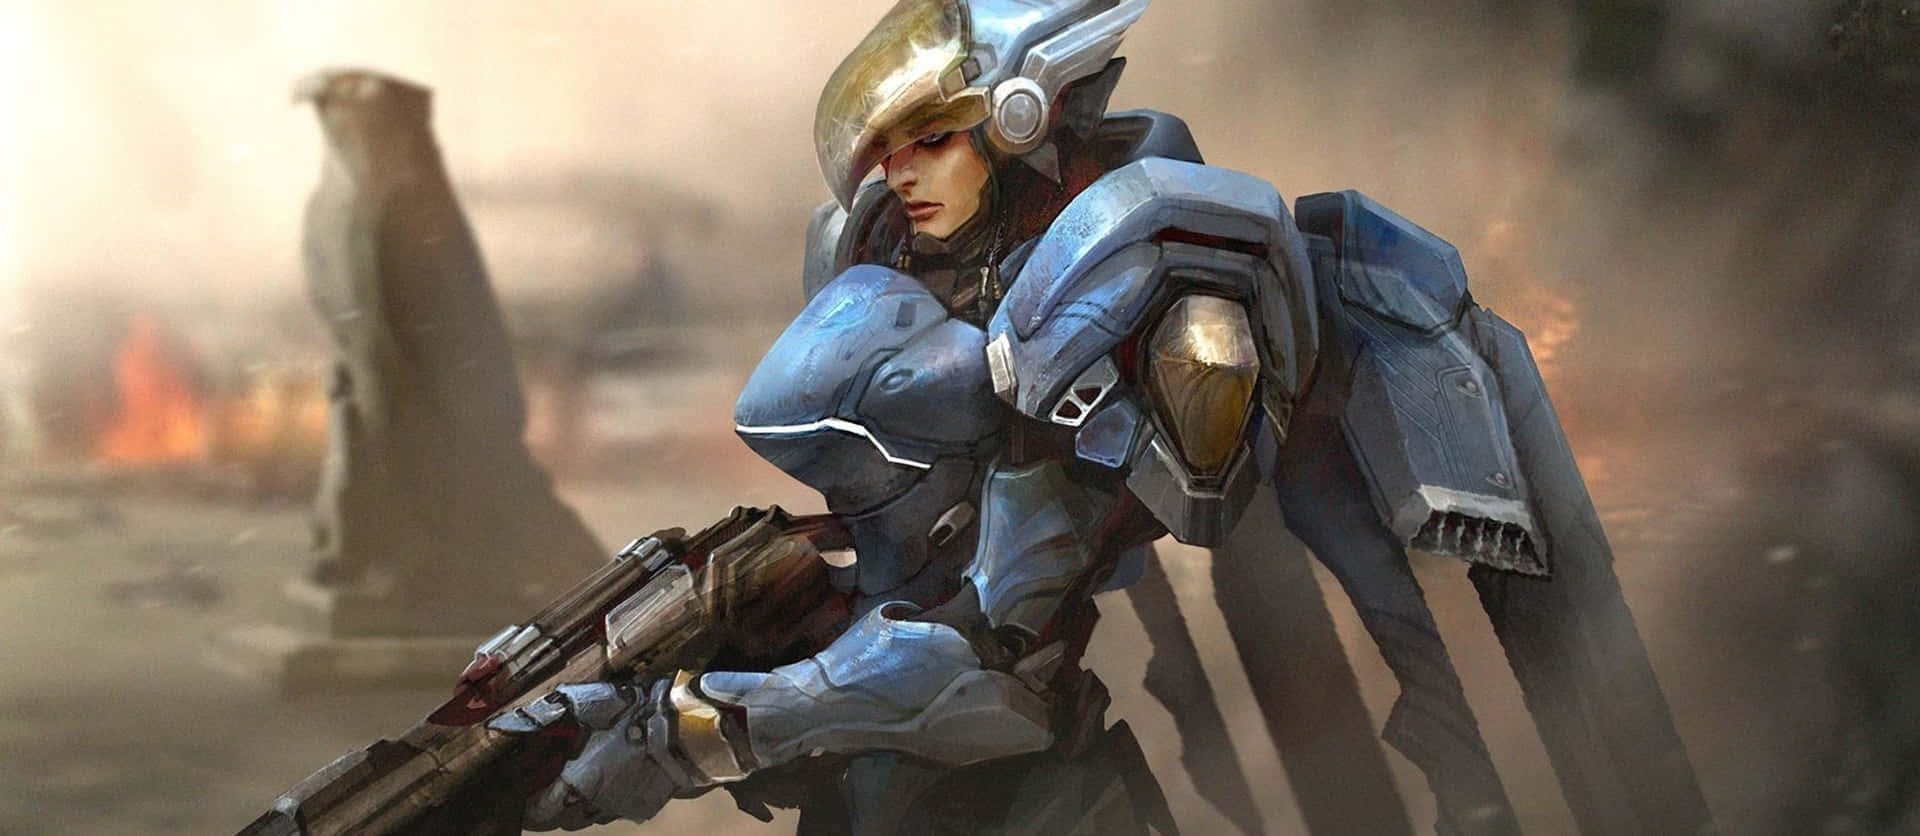 Pharah from Overwatch in Action Wallpaper